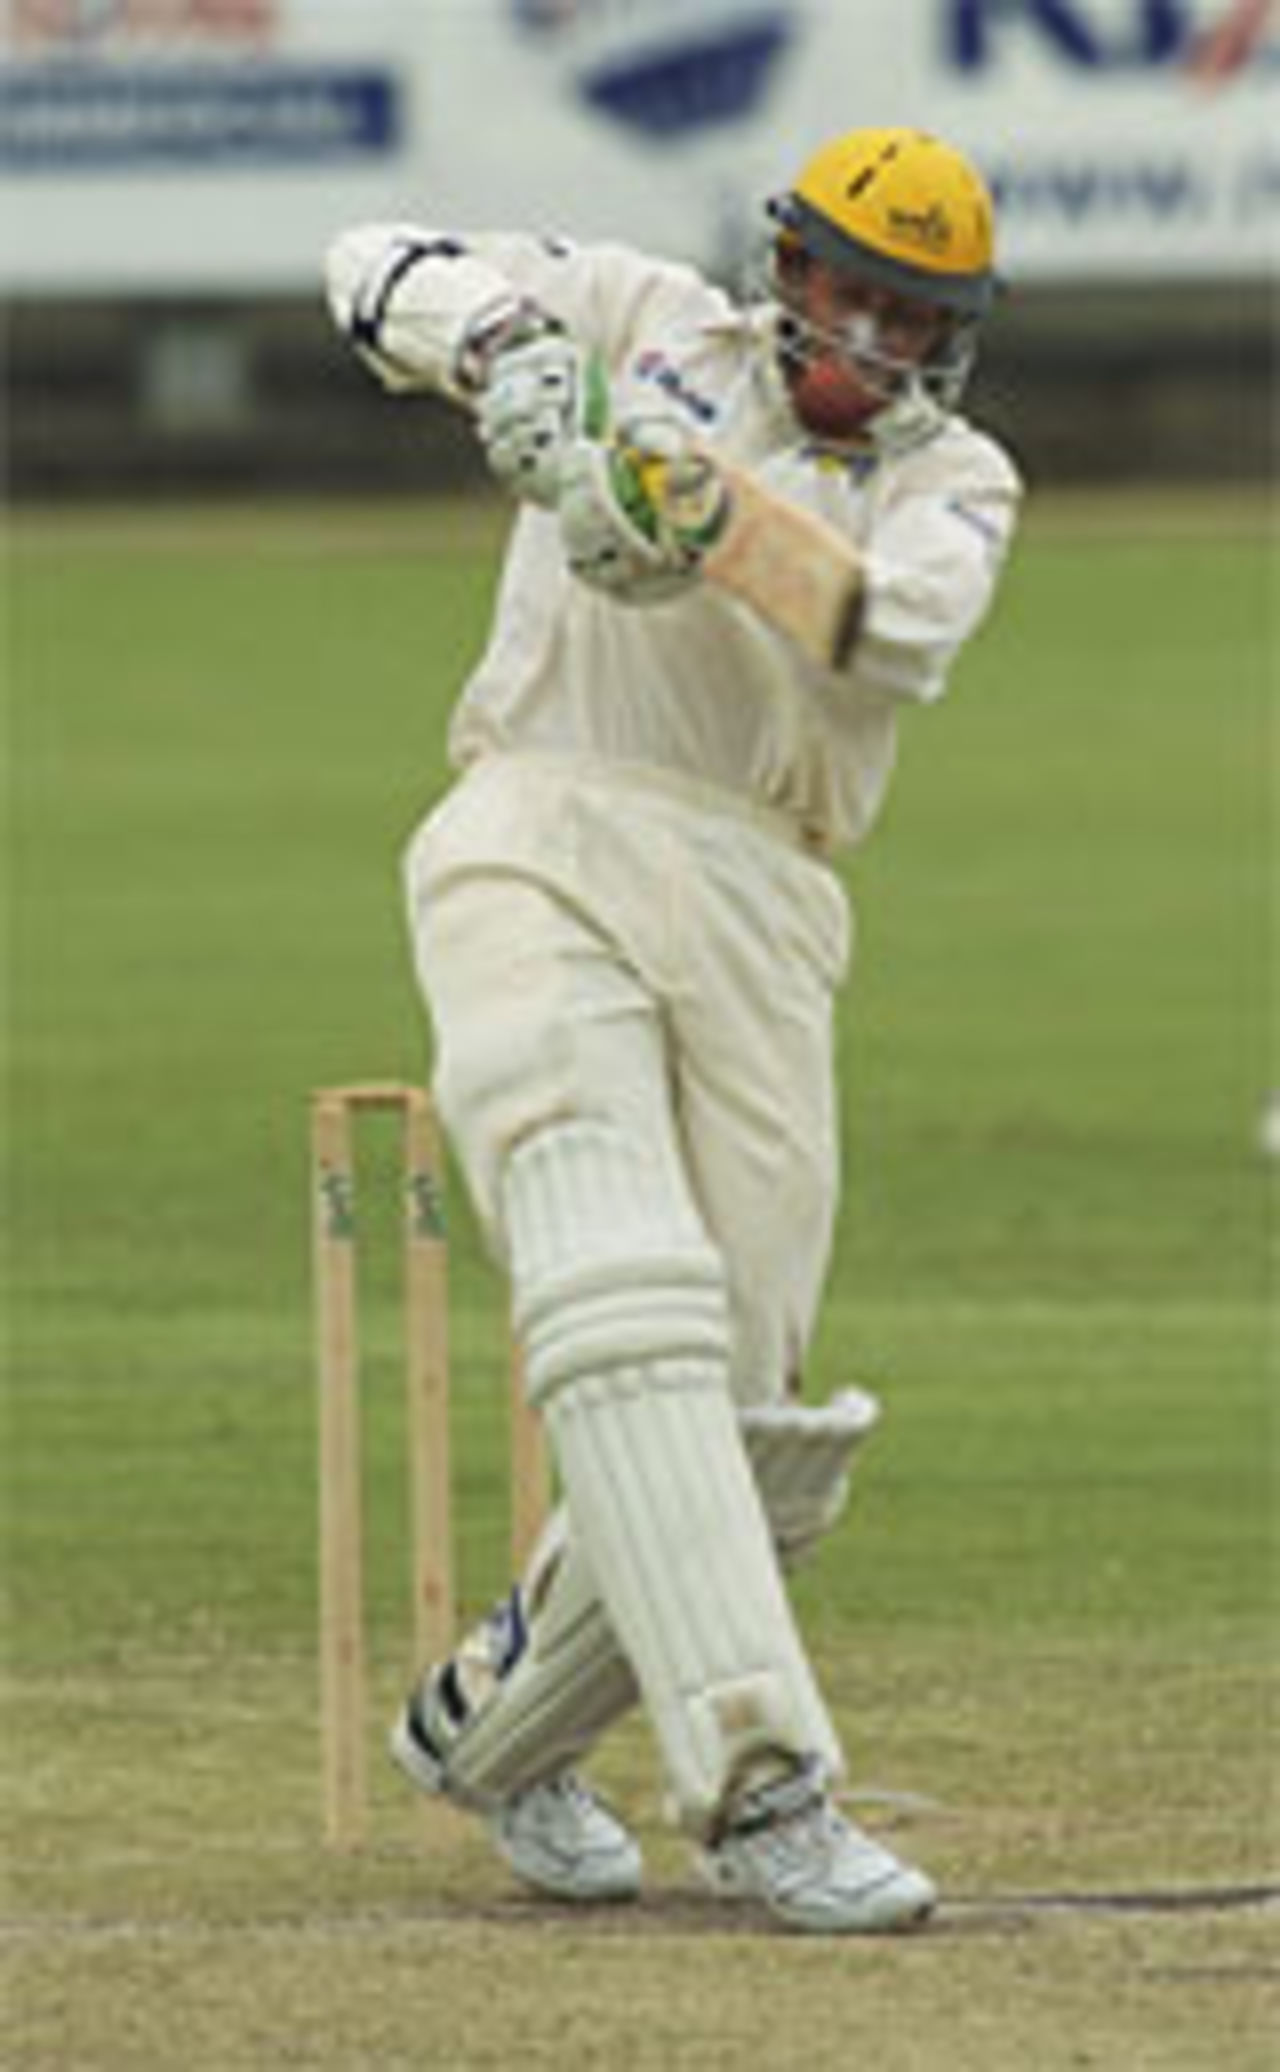 Western Australia's Mike Hussey hits out on his way to a century against Pakistanis, December 10, 2004